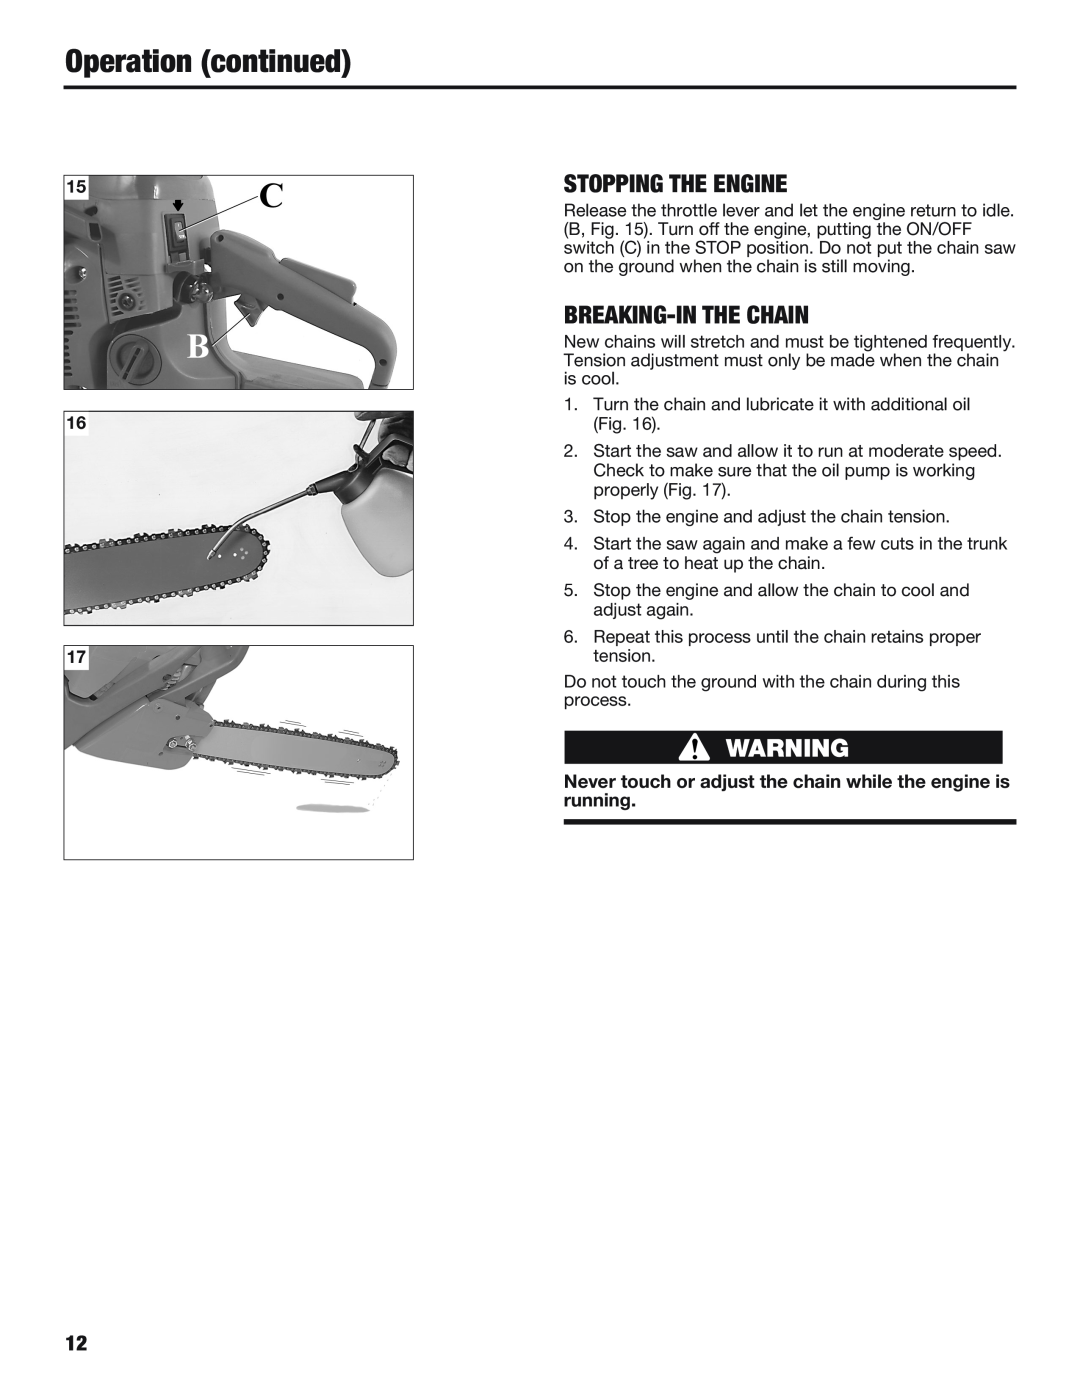 Cub Cadet CS5018, CS5220 manual Operation continued, Stopping The Engine, Breaking-Inthe Chain 